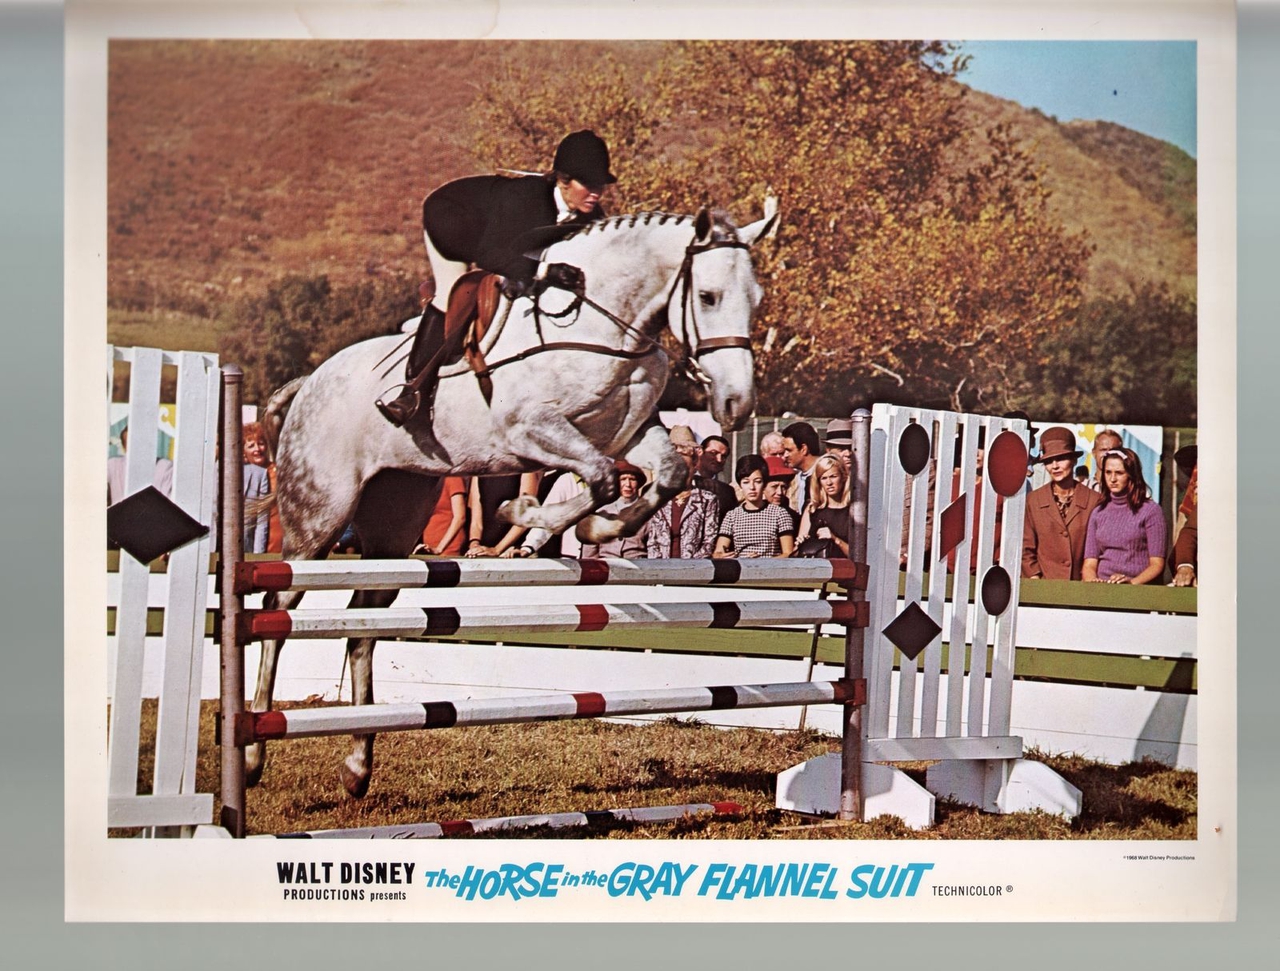 Diane Baker در صحنه فیلم سینمایی The Horse in the Gray Flannel Suit